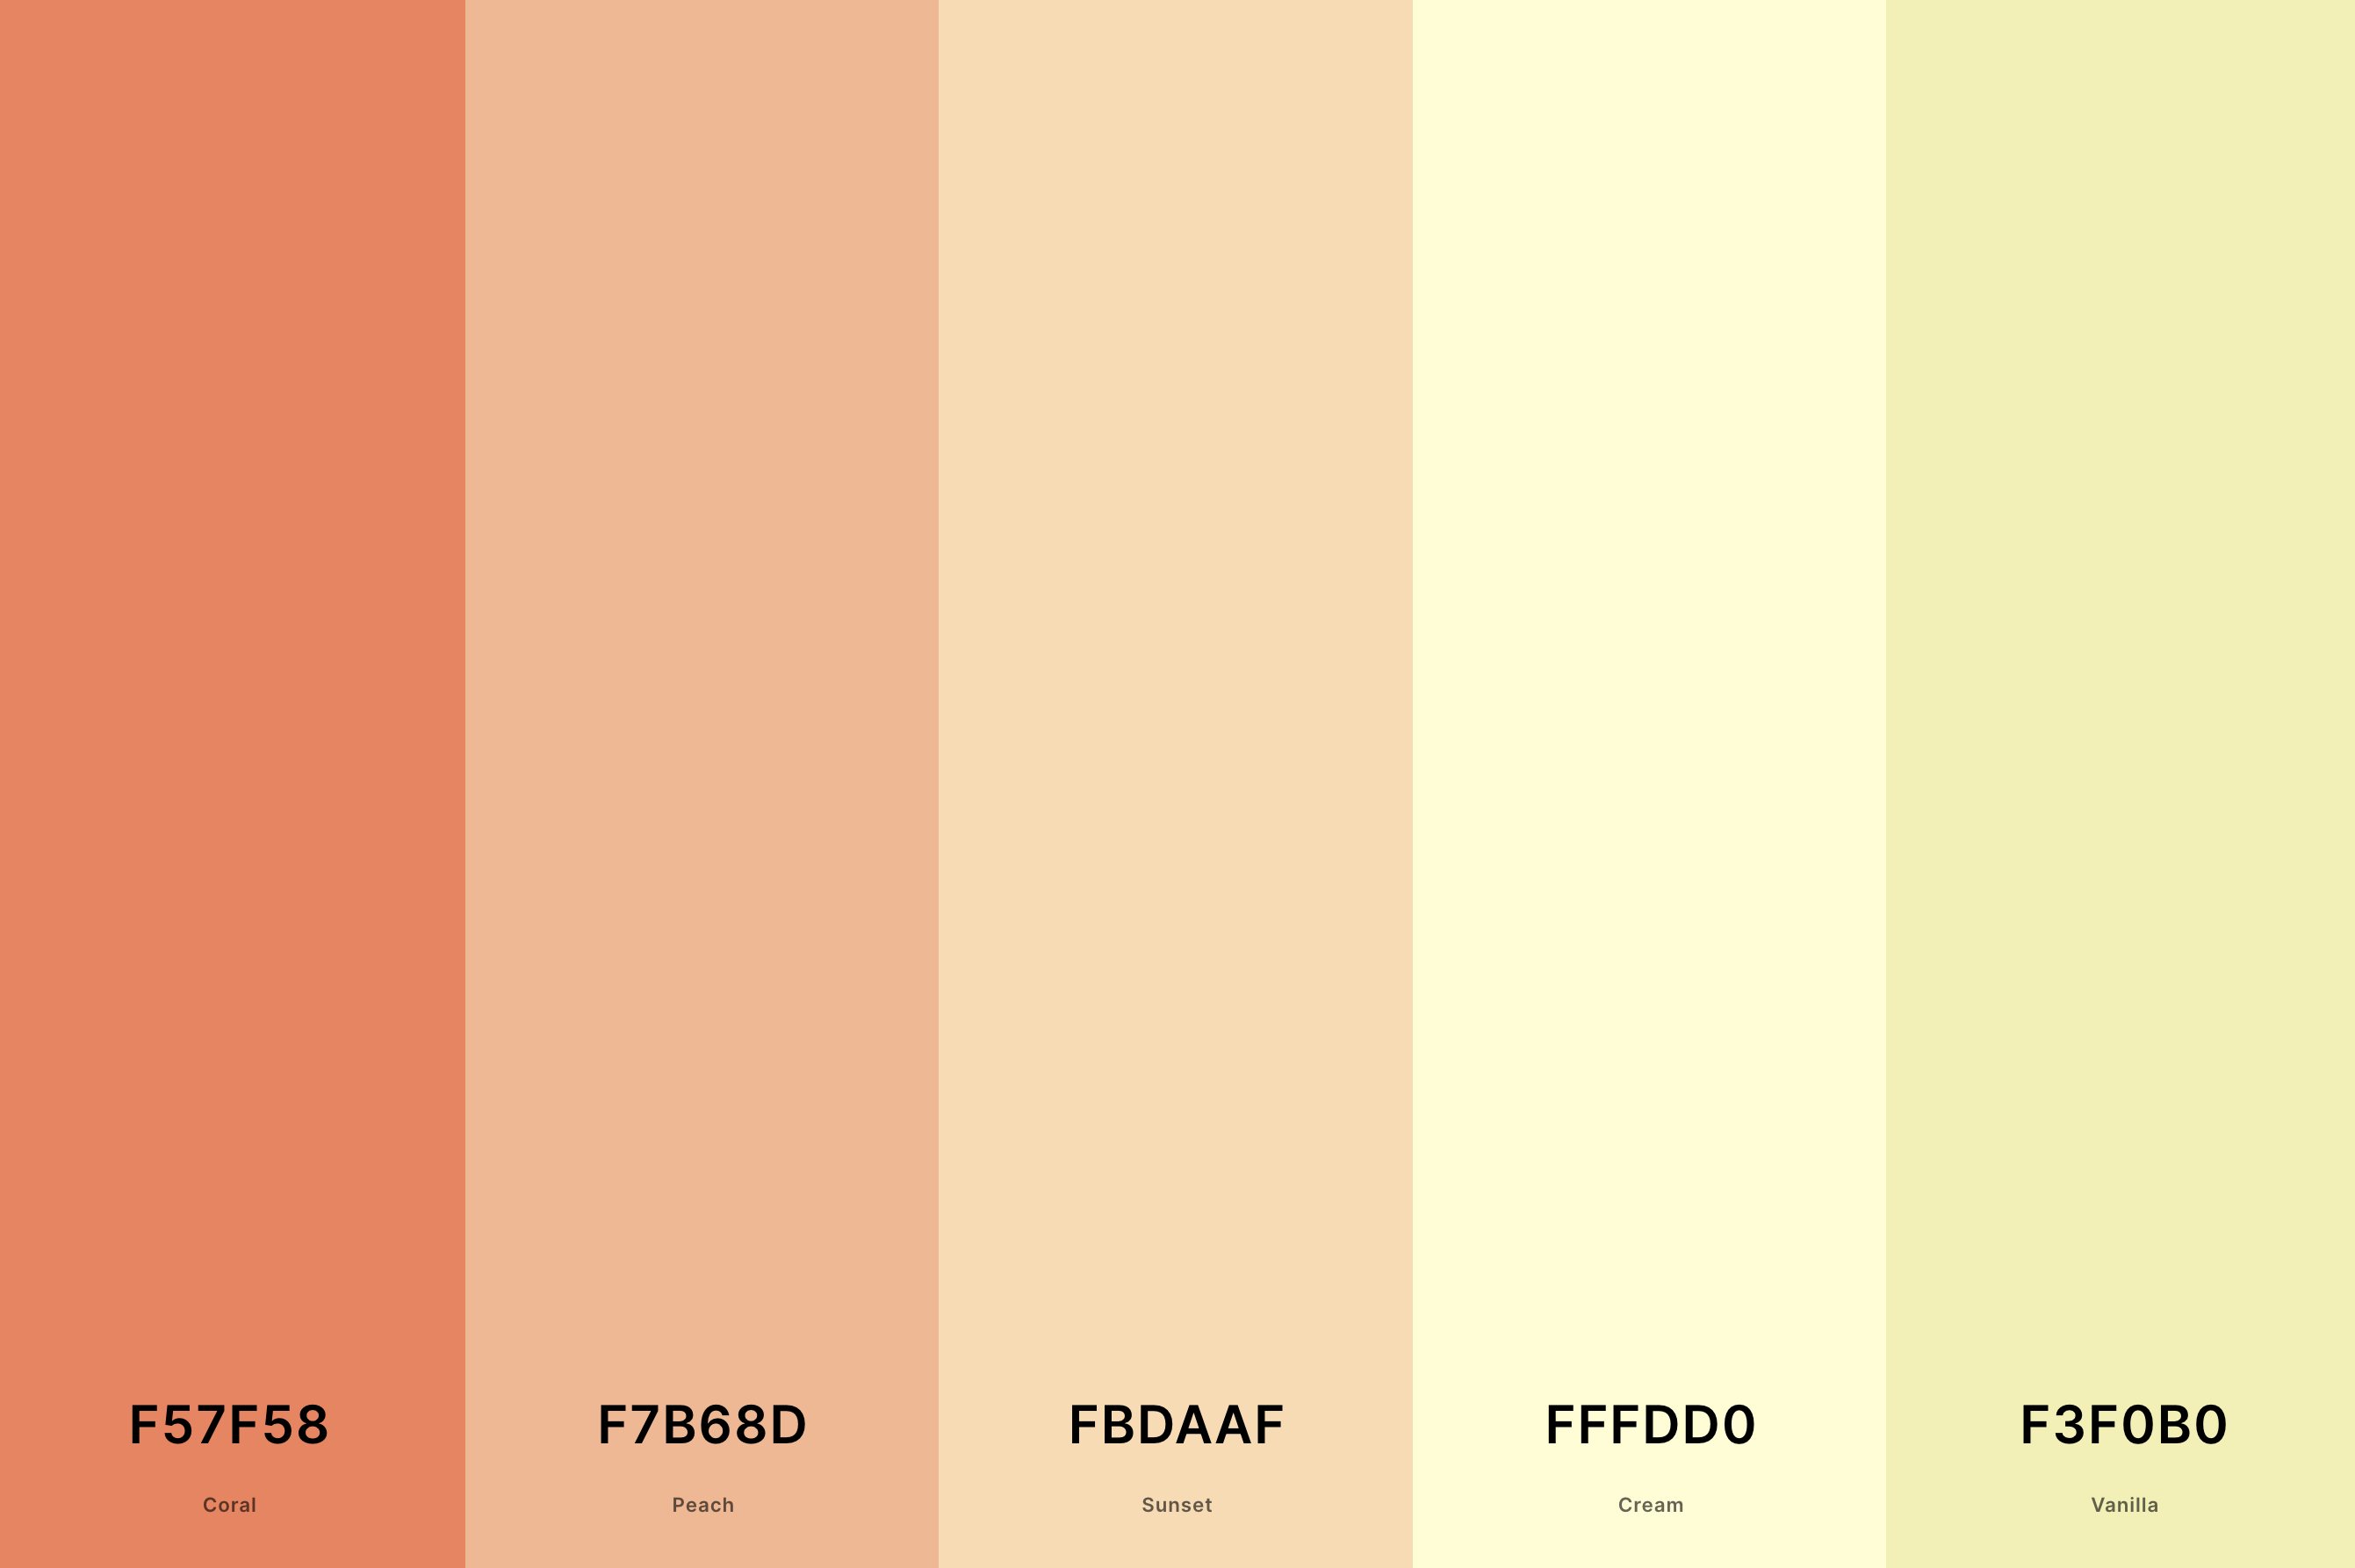 19. Cream And Peach Color Palette Color Palette with Coral (Hex #F57F58) + Peach (Hex #F7B68D) + Sunset (Hex #FBDAAF) + Cream (Hex #FFFDD0) + Vanilla (Hex #F3F0B0) Color Palette with Hex Codes